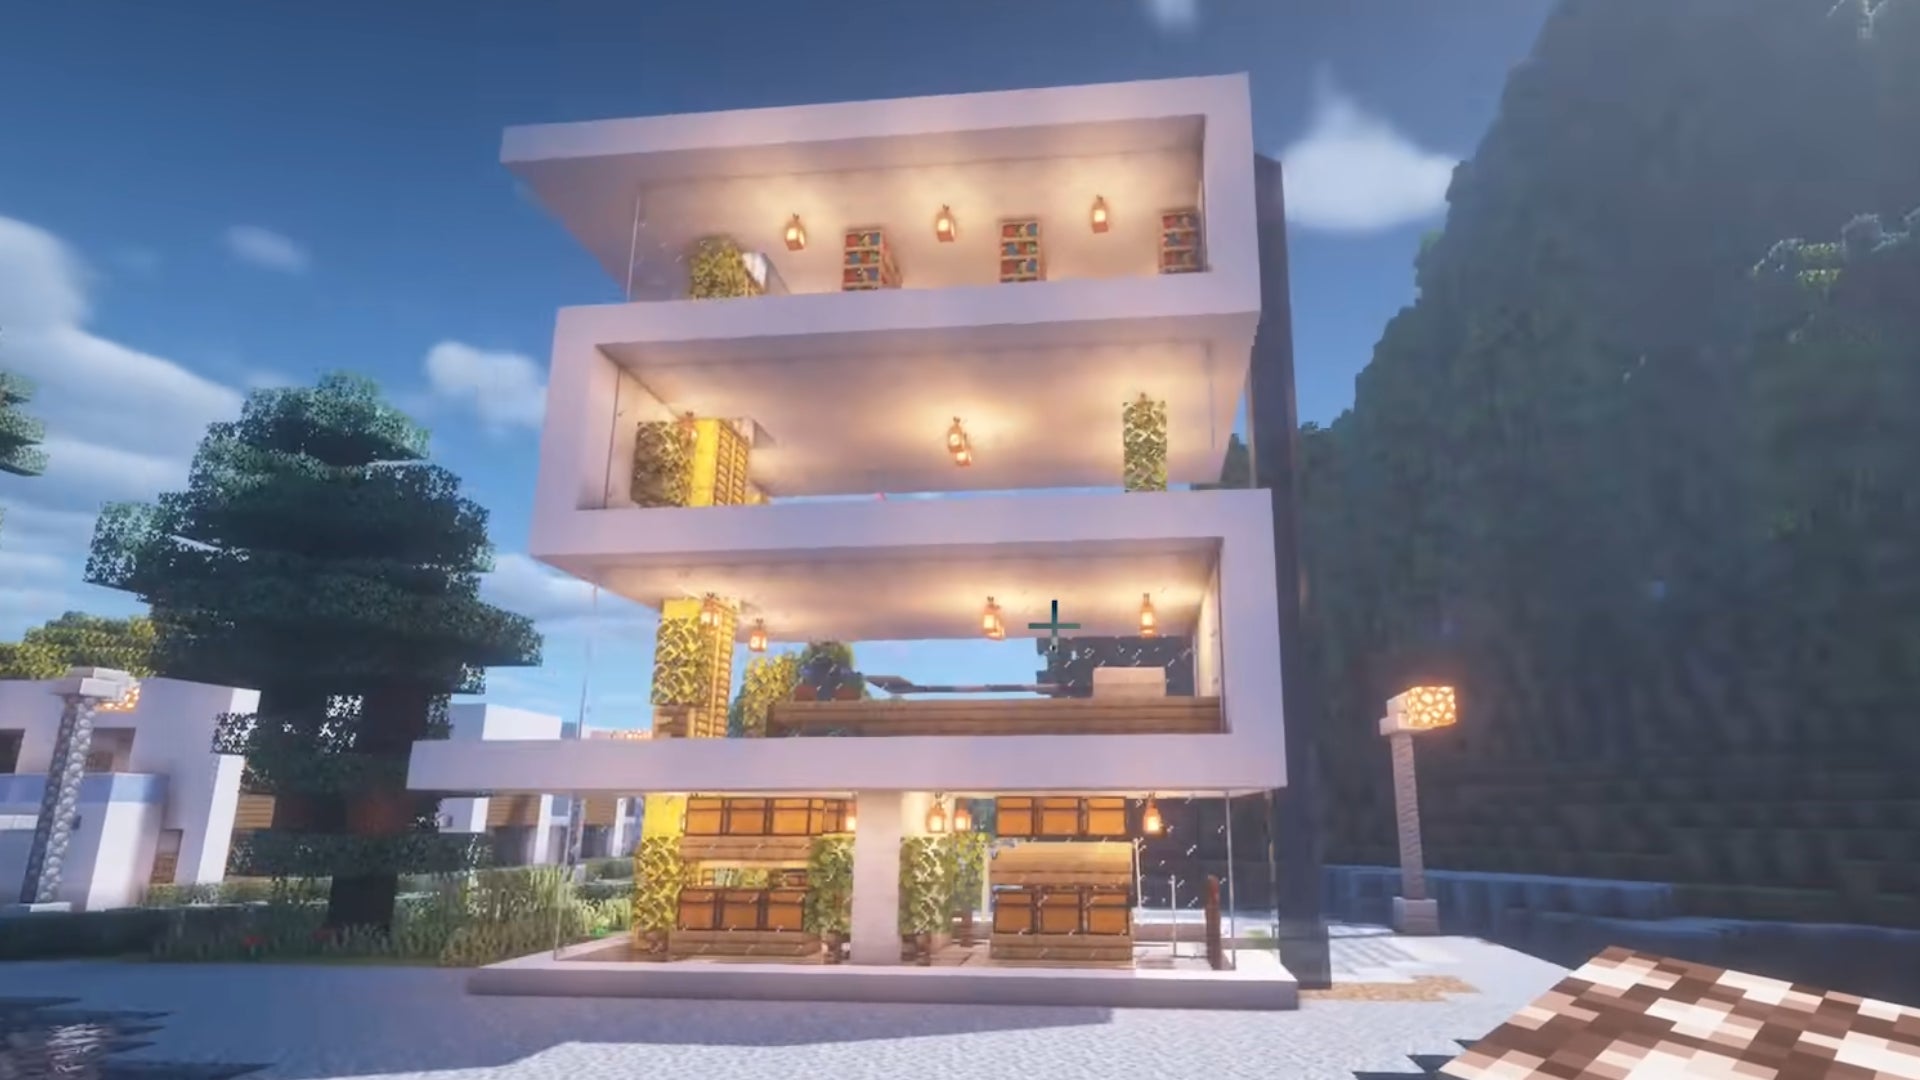 A 4-story modern house in Minecraft, built by YouTuber "JUNS MAB Architecture tutorial".